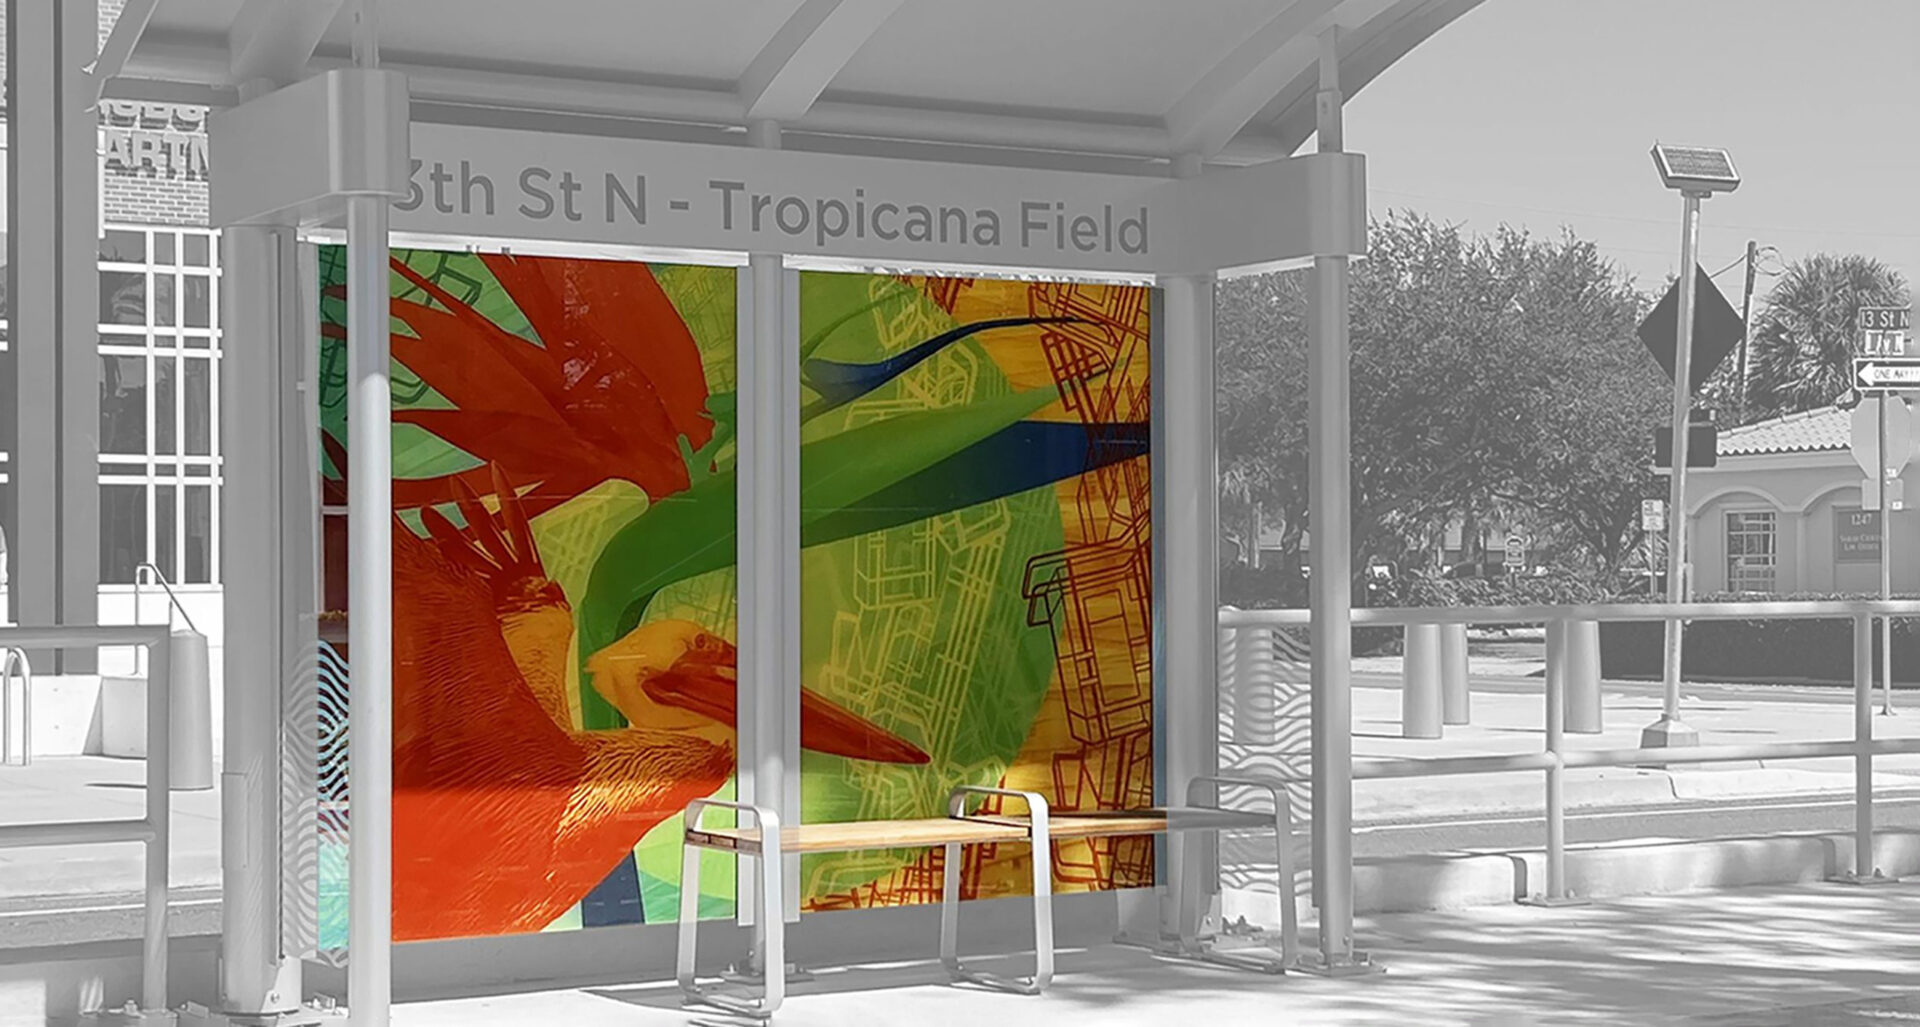 sun-runner-bus-shelters-by-catherine-woods